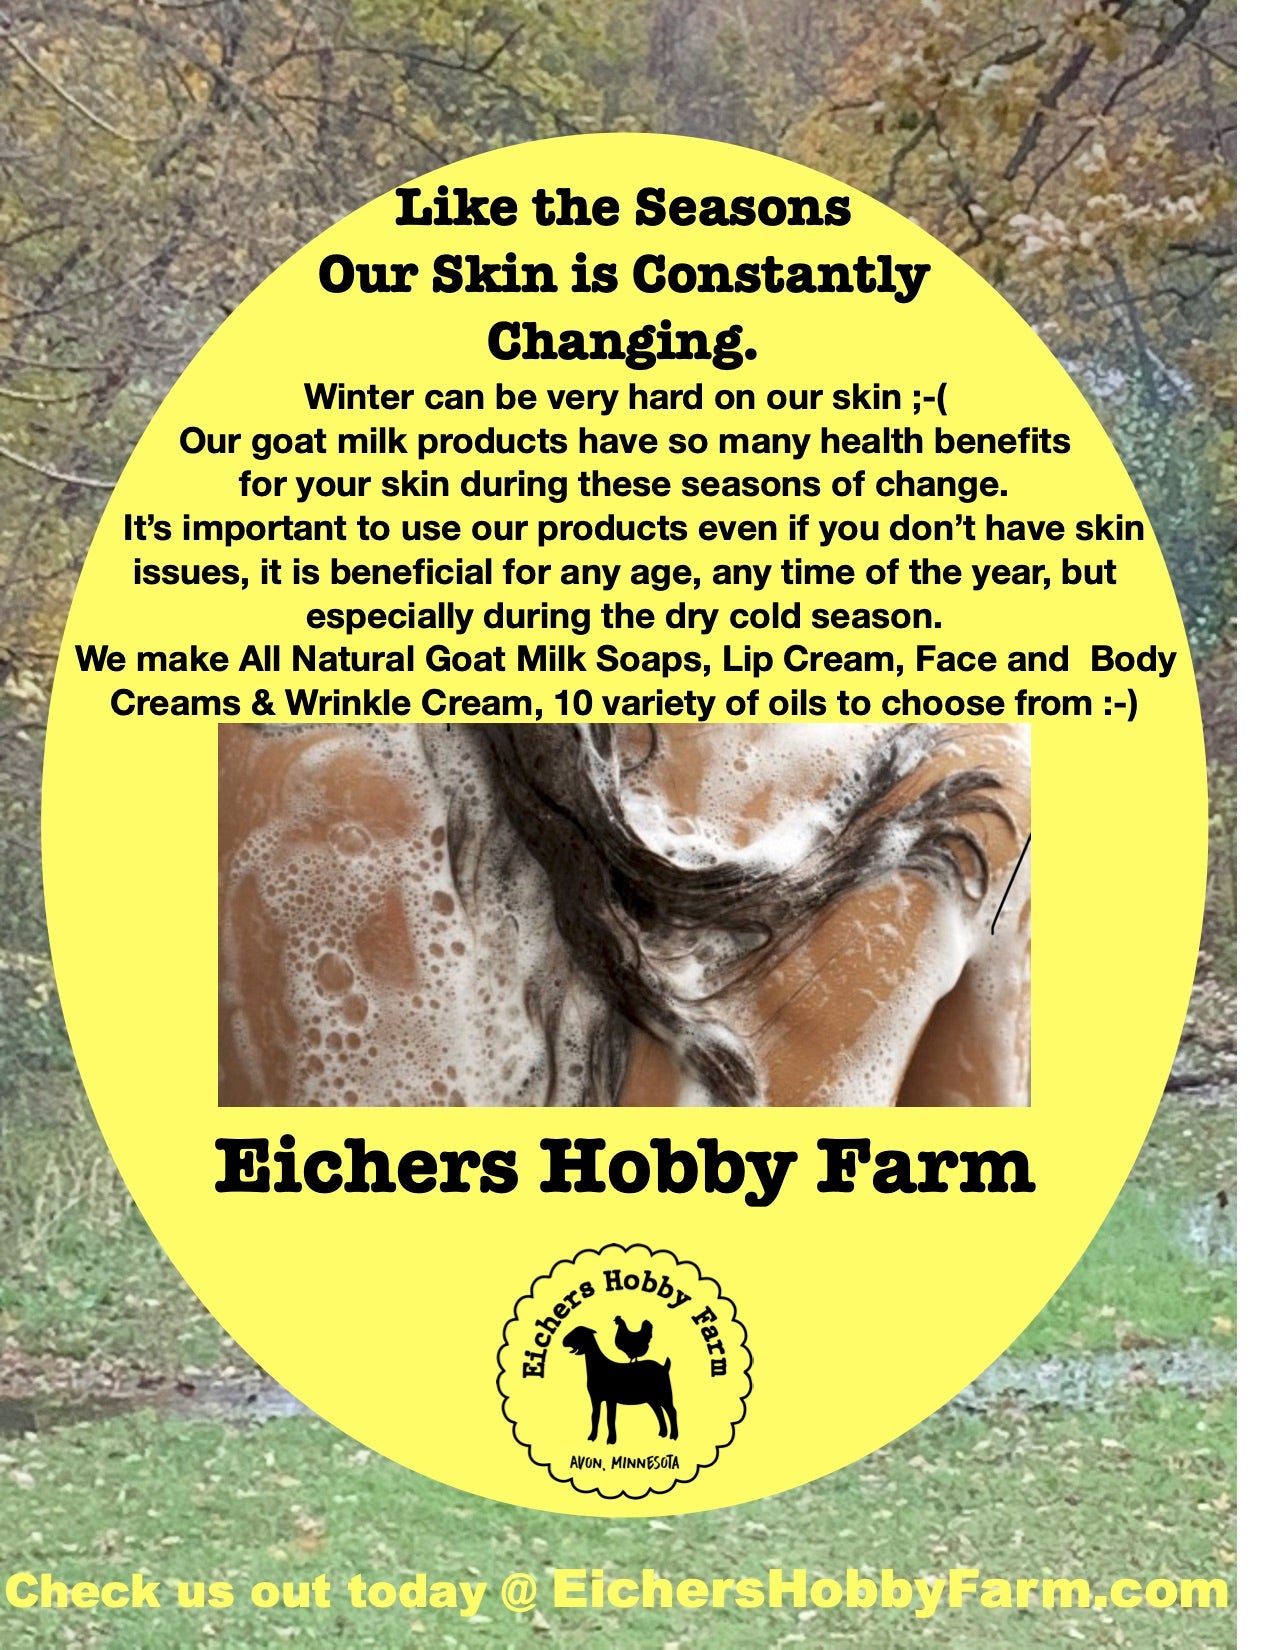 As the season change so does our skin, EHF All Natural Goat Milk Products will take care of your Largest organ, so you don't have to worry and just enjoy beautiful Healthy skin all year round!